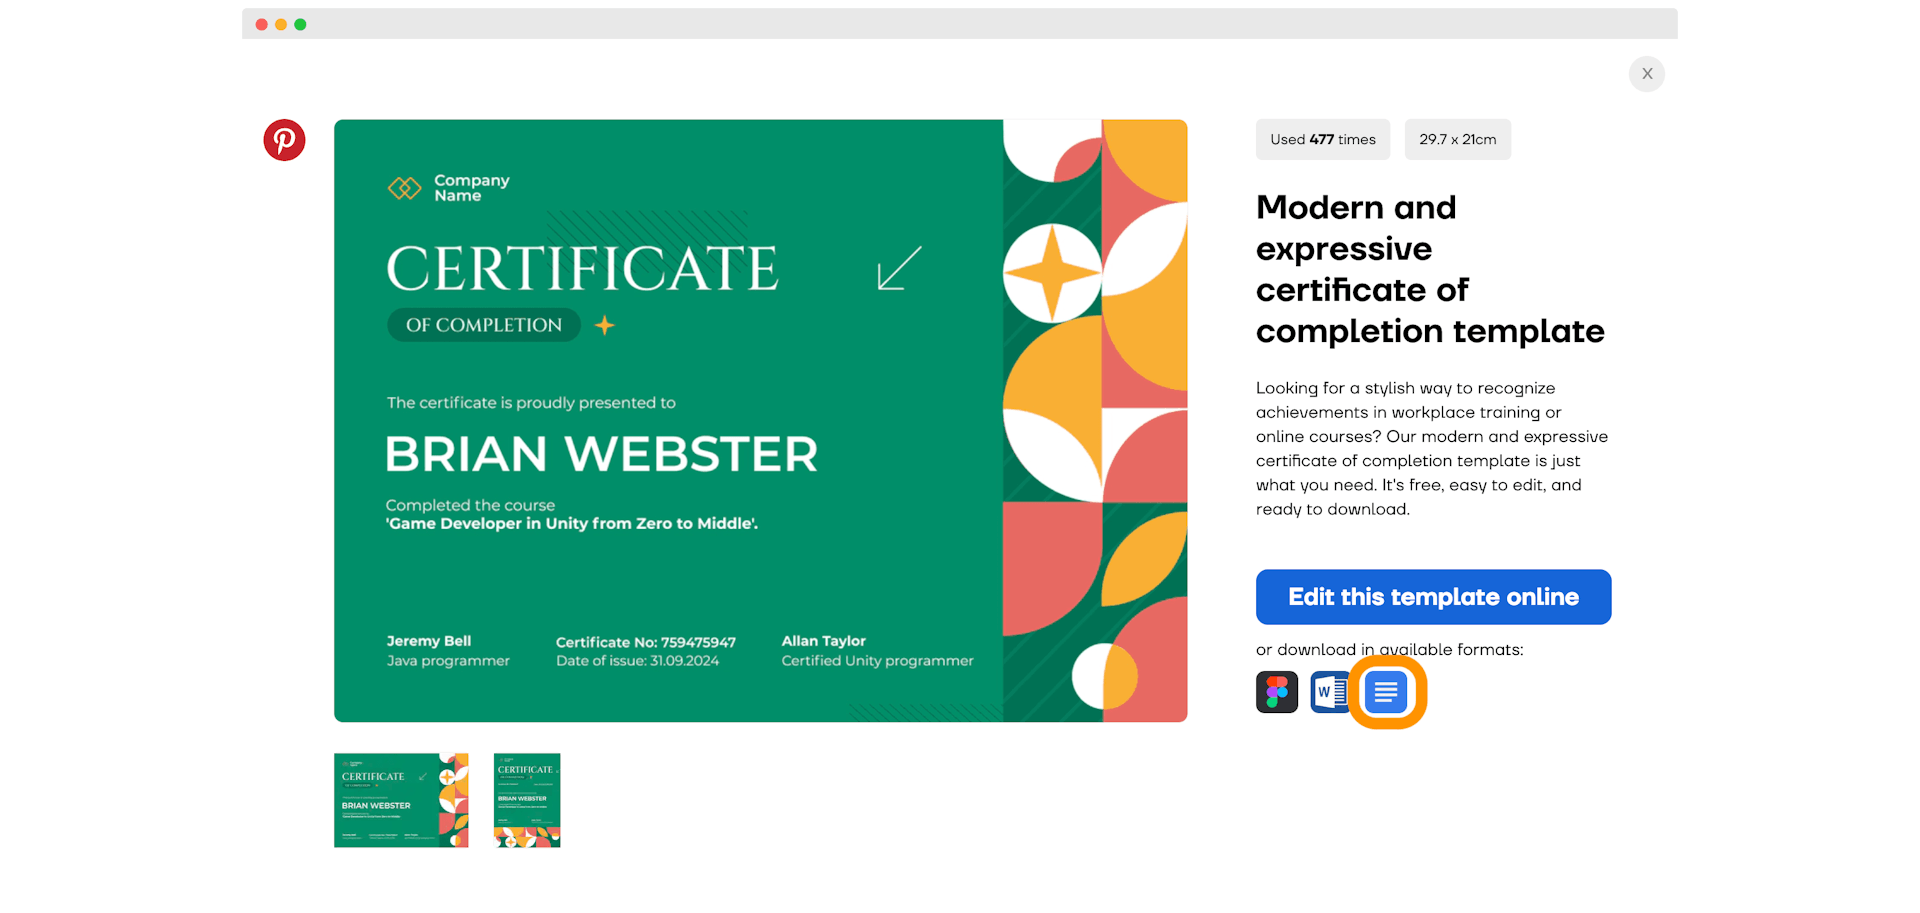 A way to download free certificate template in Google Docs via Certifier.